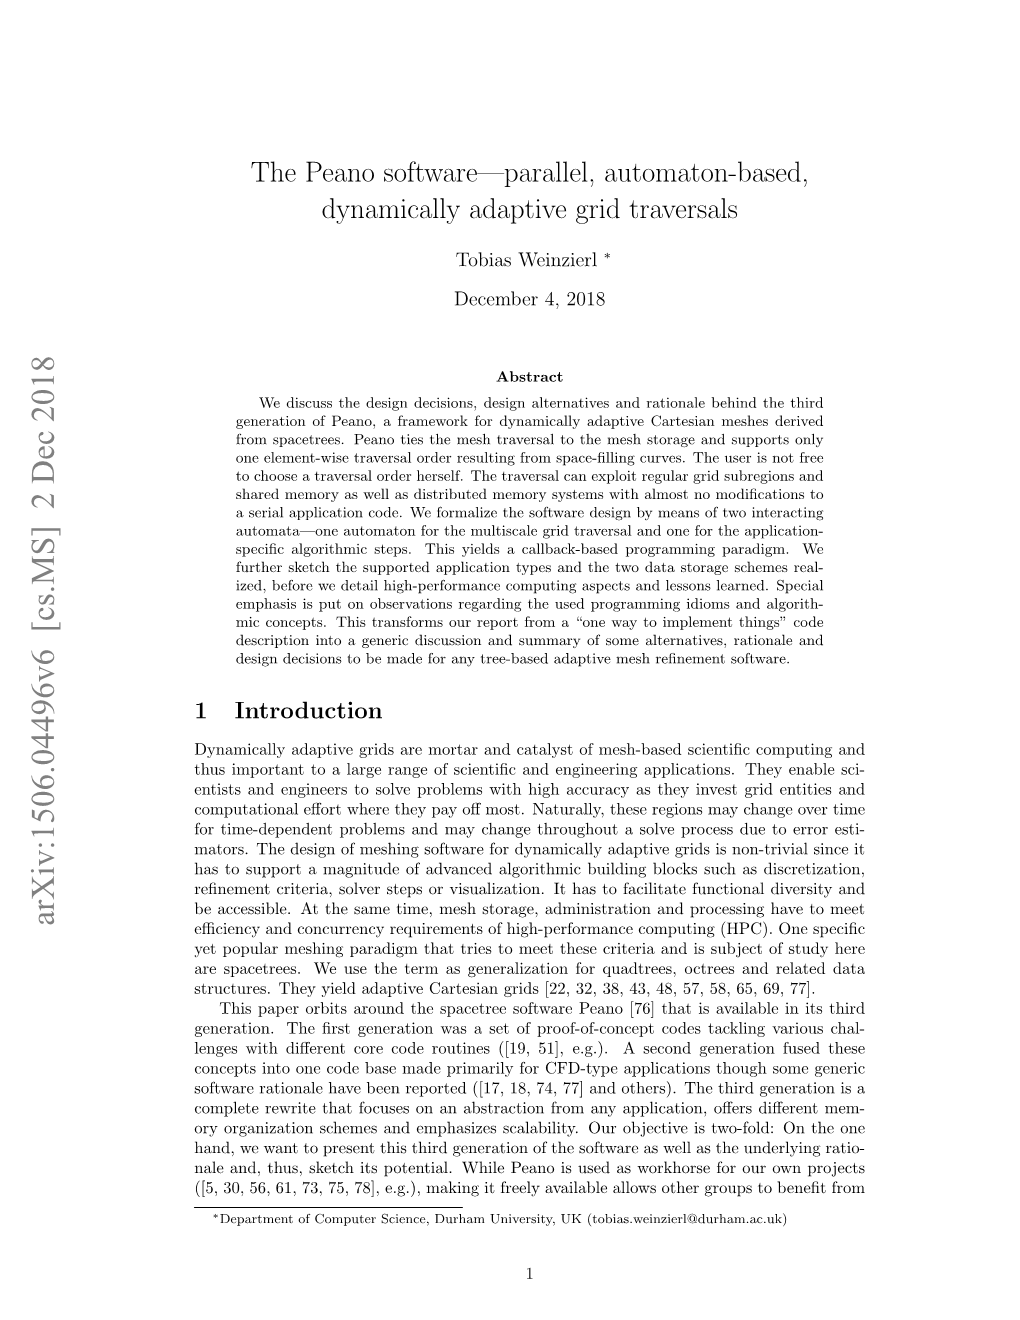 The Peano Software—Parallel, Automaton-Based, Dynamically Adaptive Grid Traversals